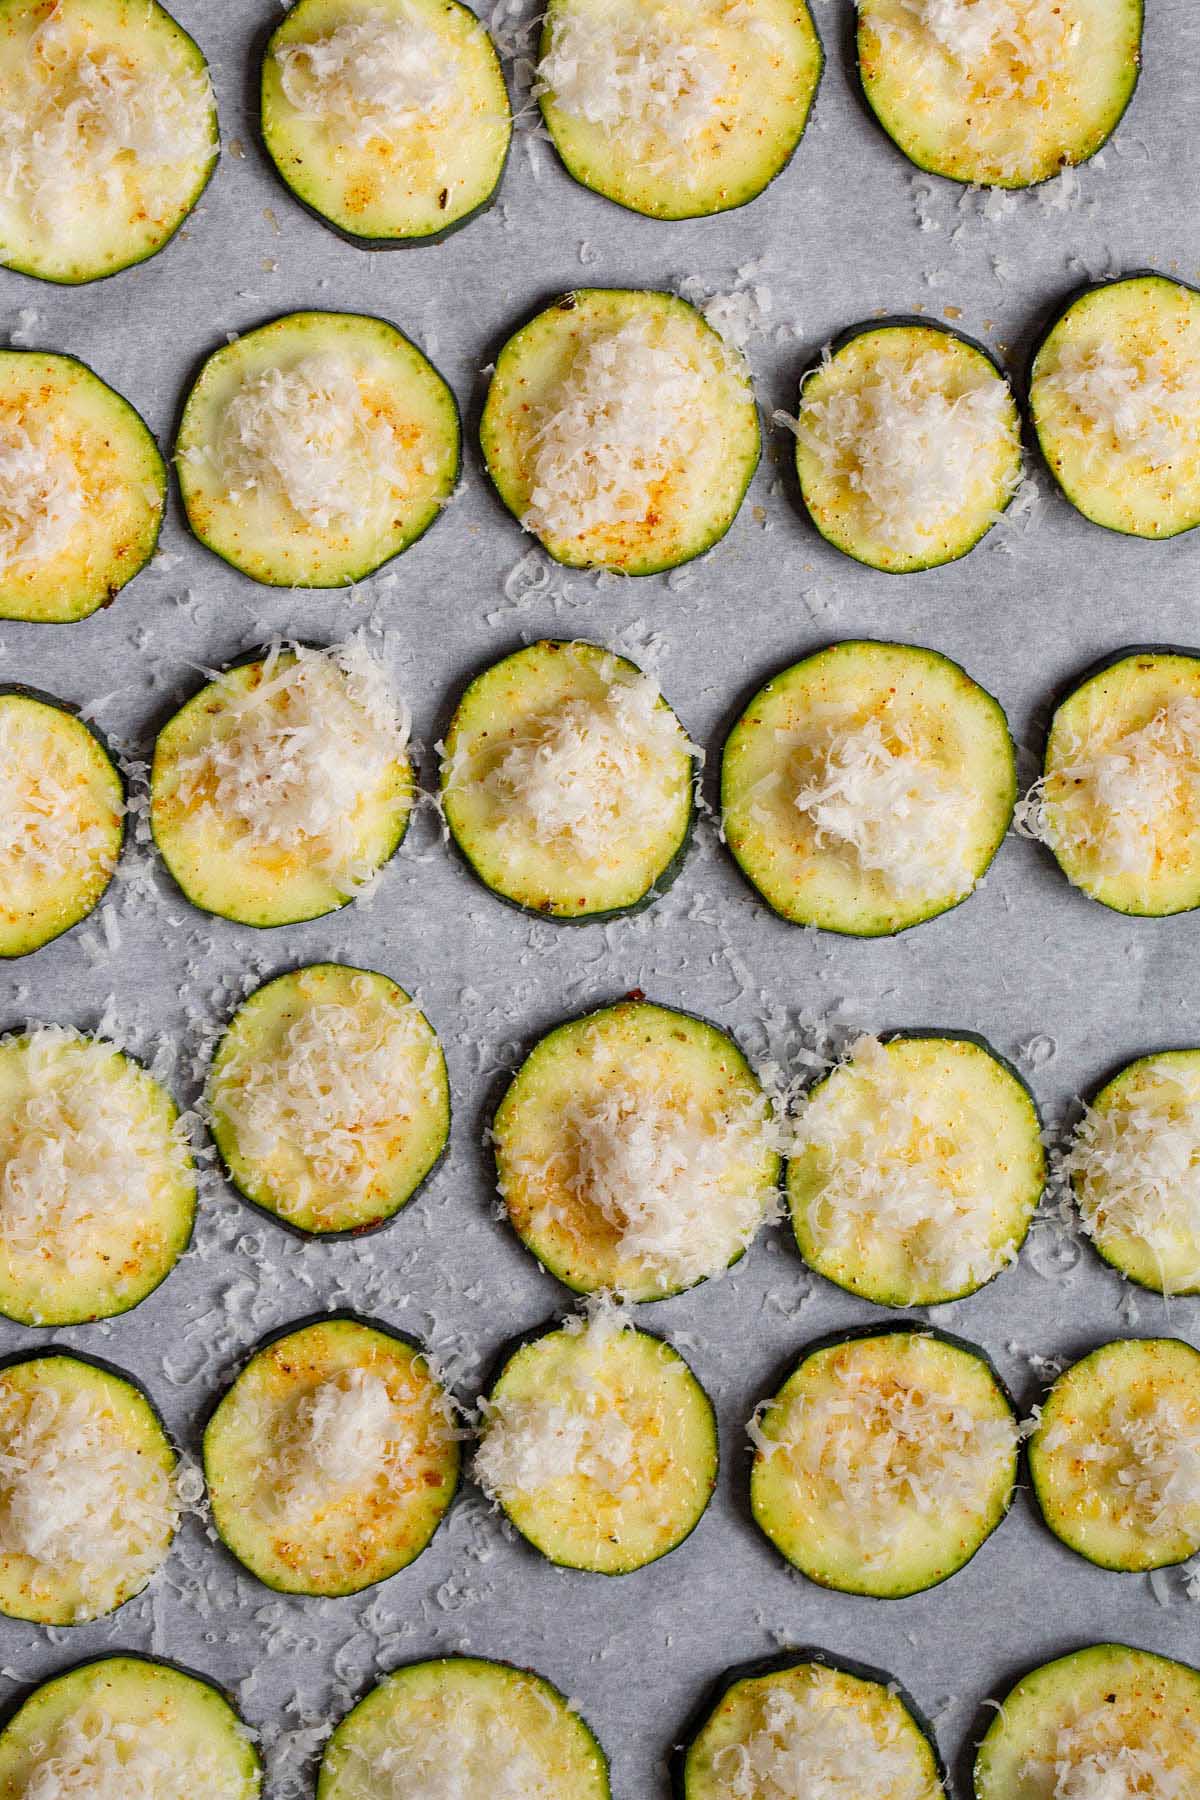 Zucchini with parmesan cheese on top.